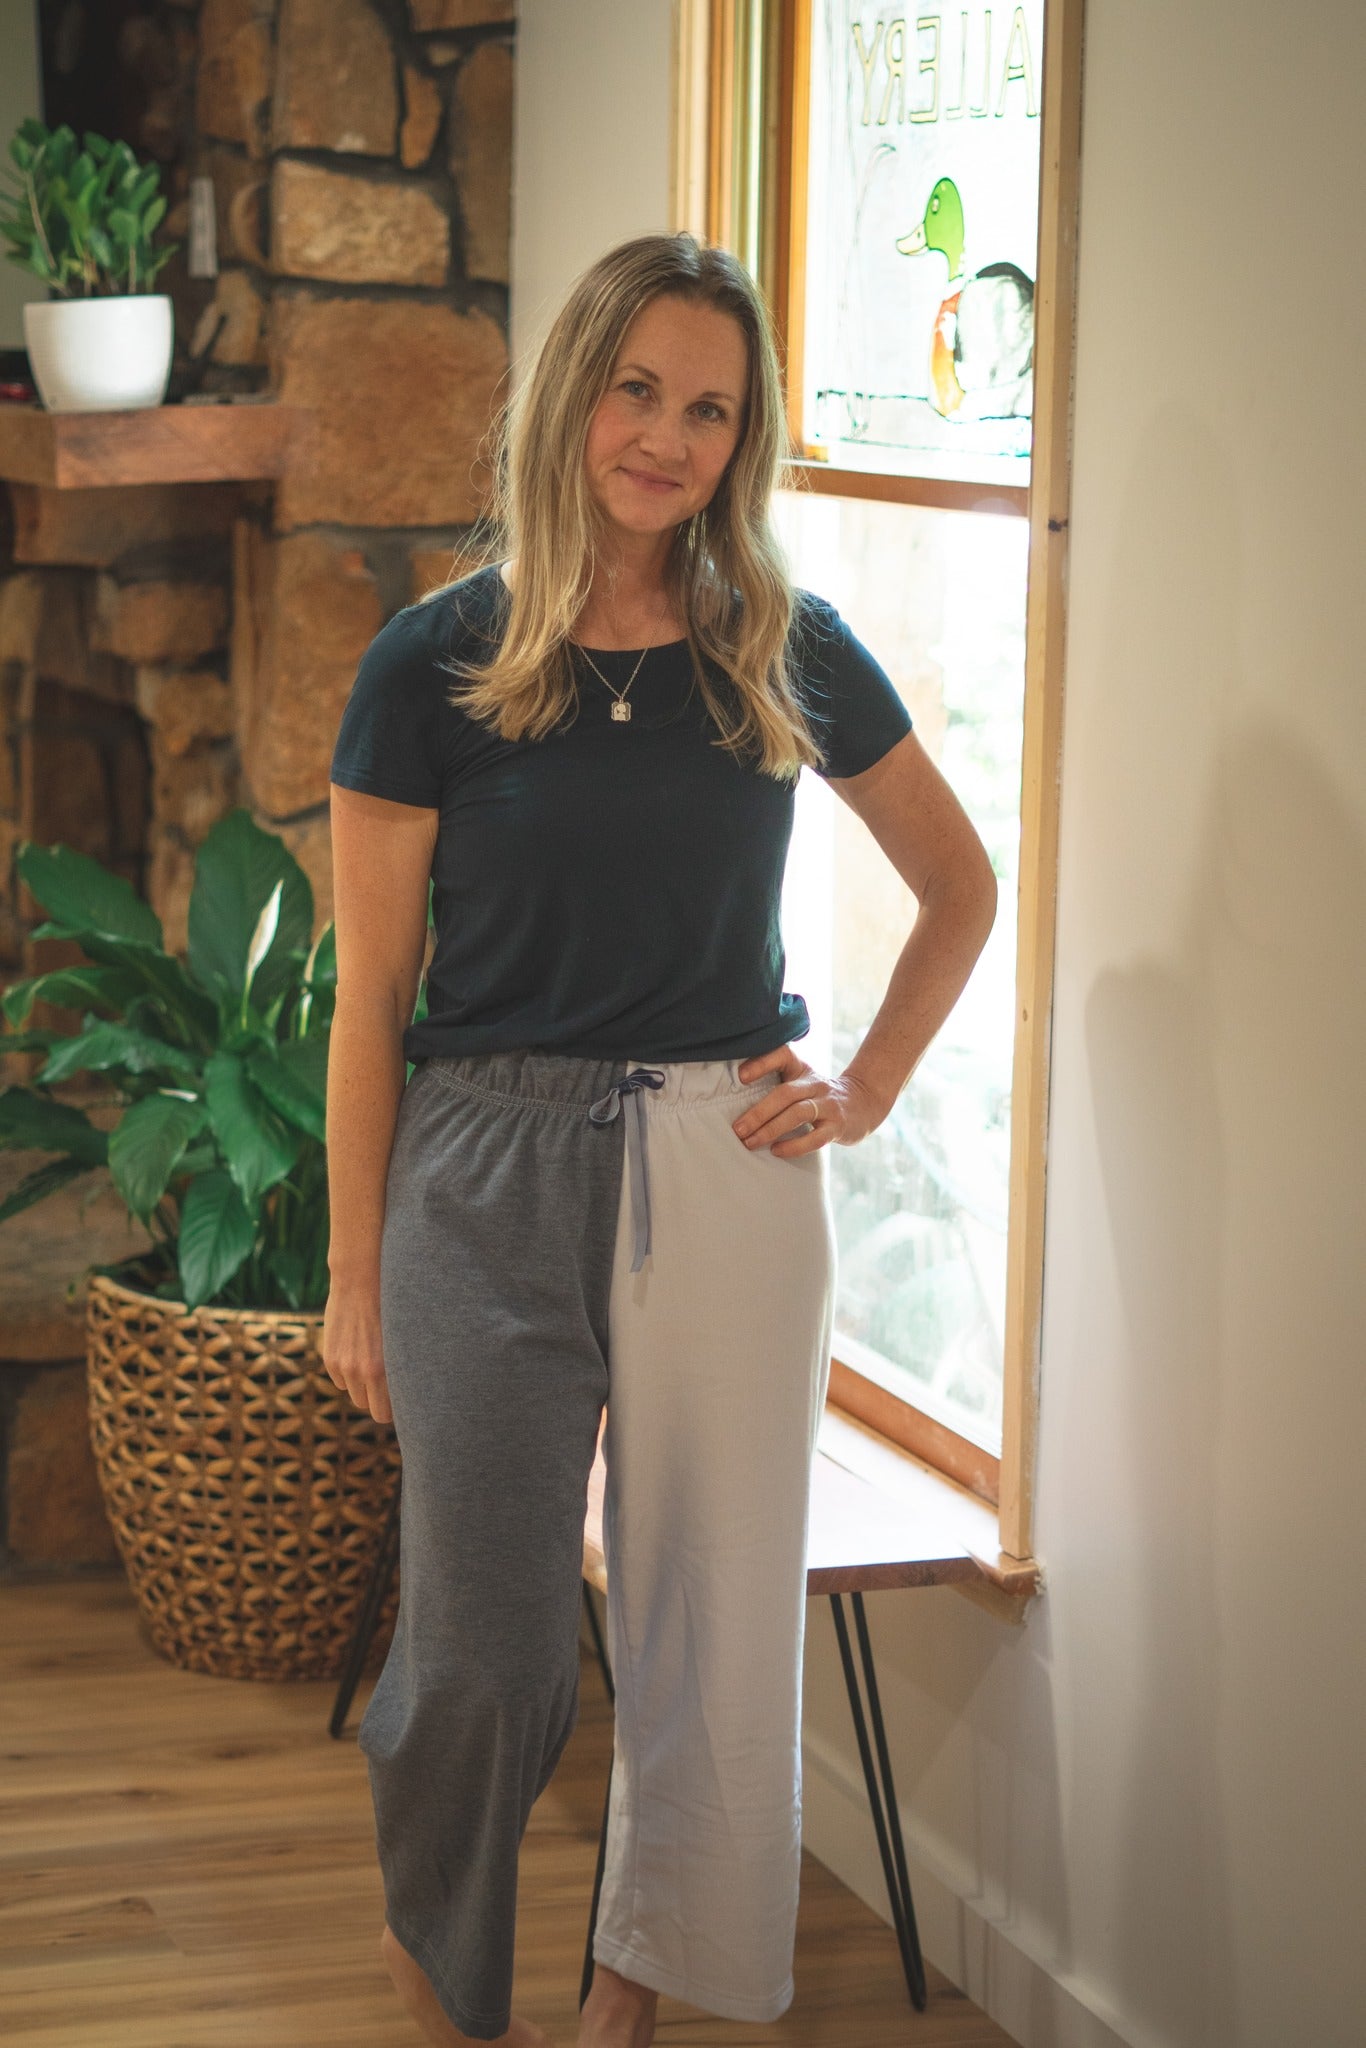 The Simple Pants Sewing Pattern